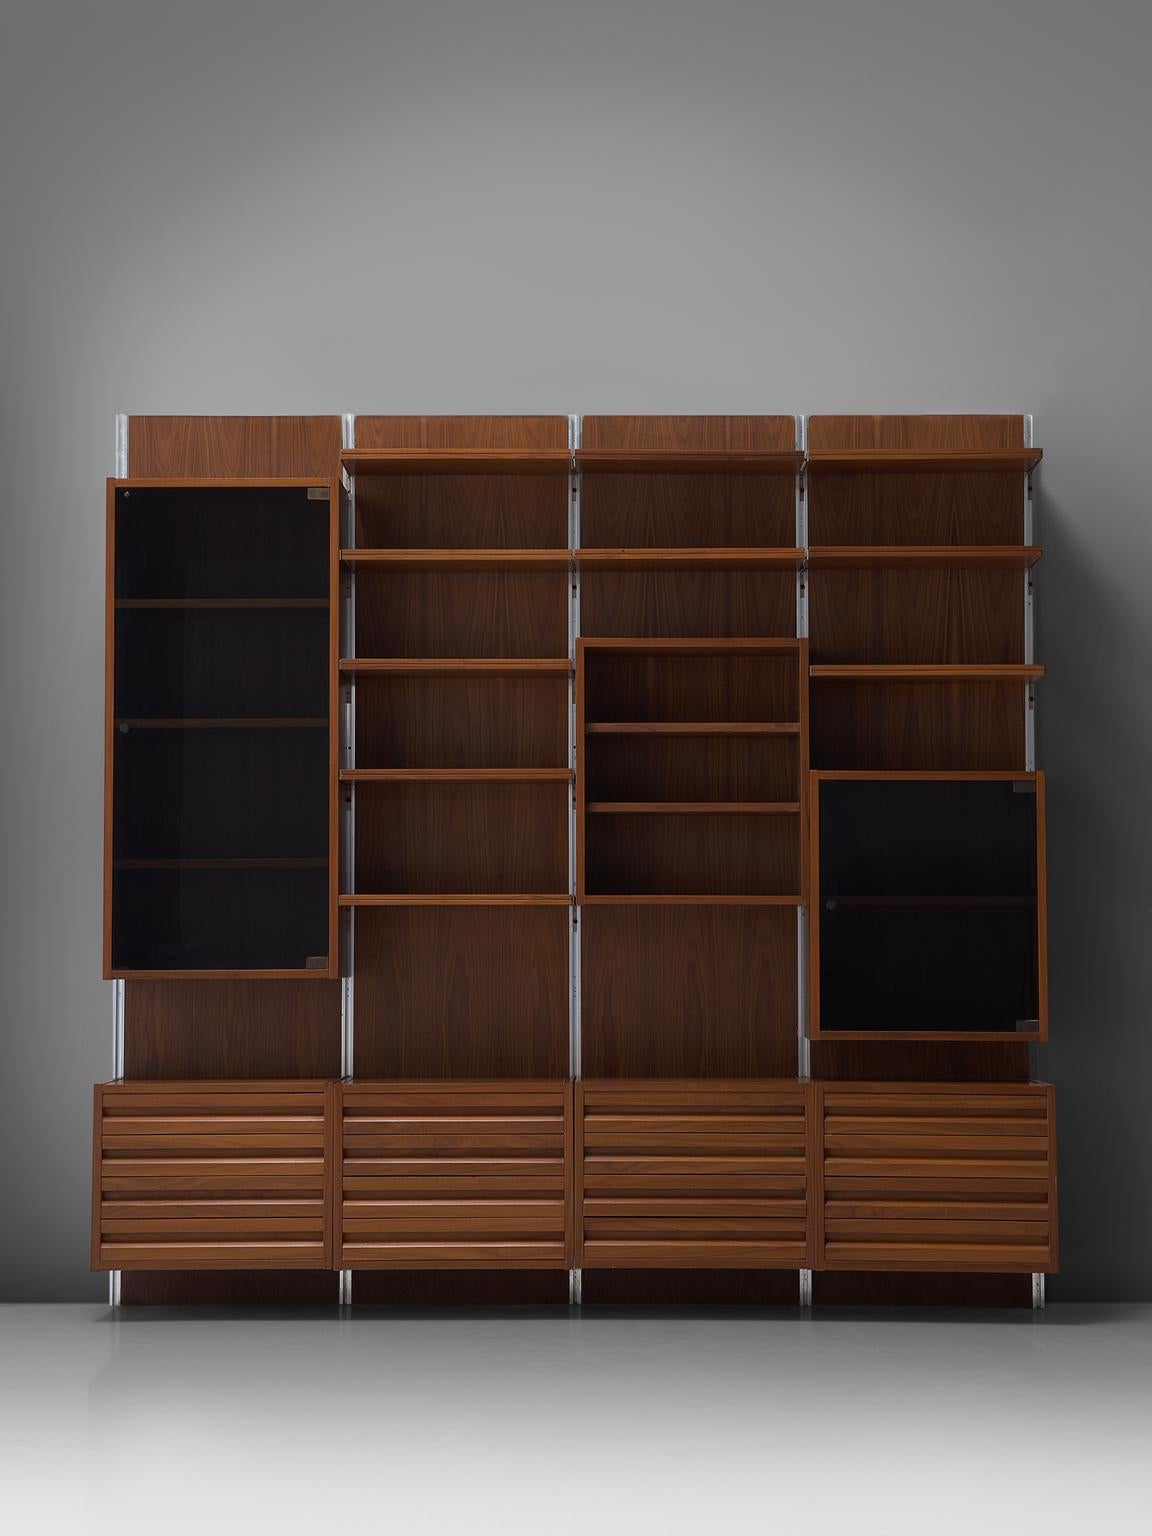 Osvaldo Borsani for Tecno, wall unit 'E22', walnut, glass, polished steel, Italy, 1957

This wall-mounted shelving unit is designed by Osvaldo Borsani and is four sections large, with a width of 2.8 metres. The order and lay out of the shelves are